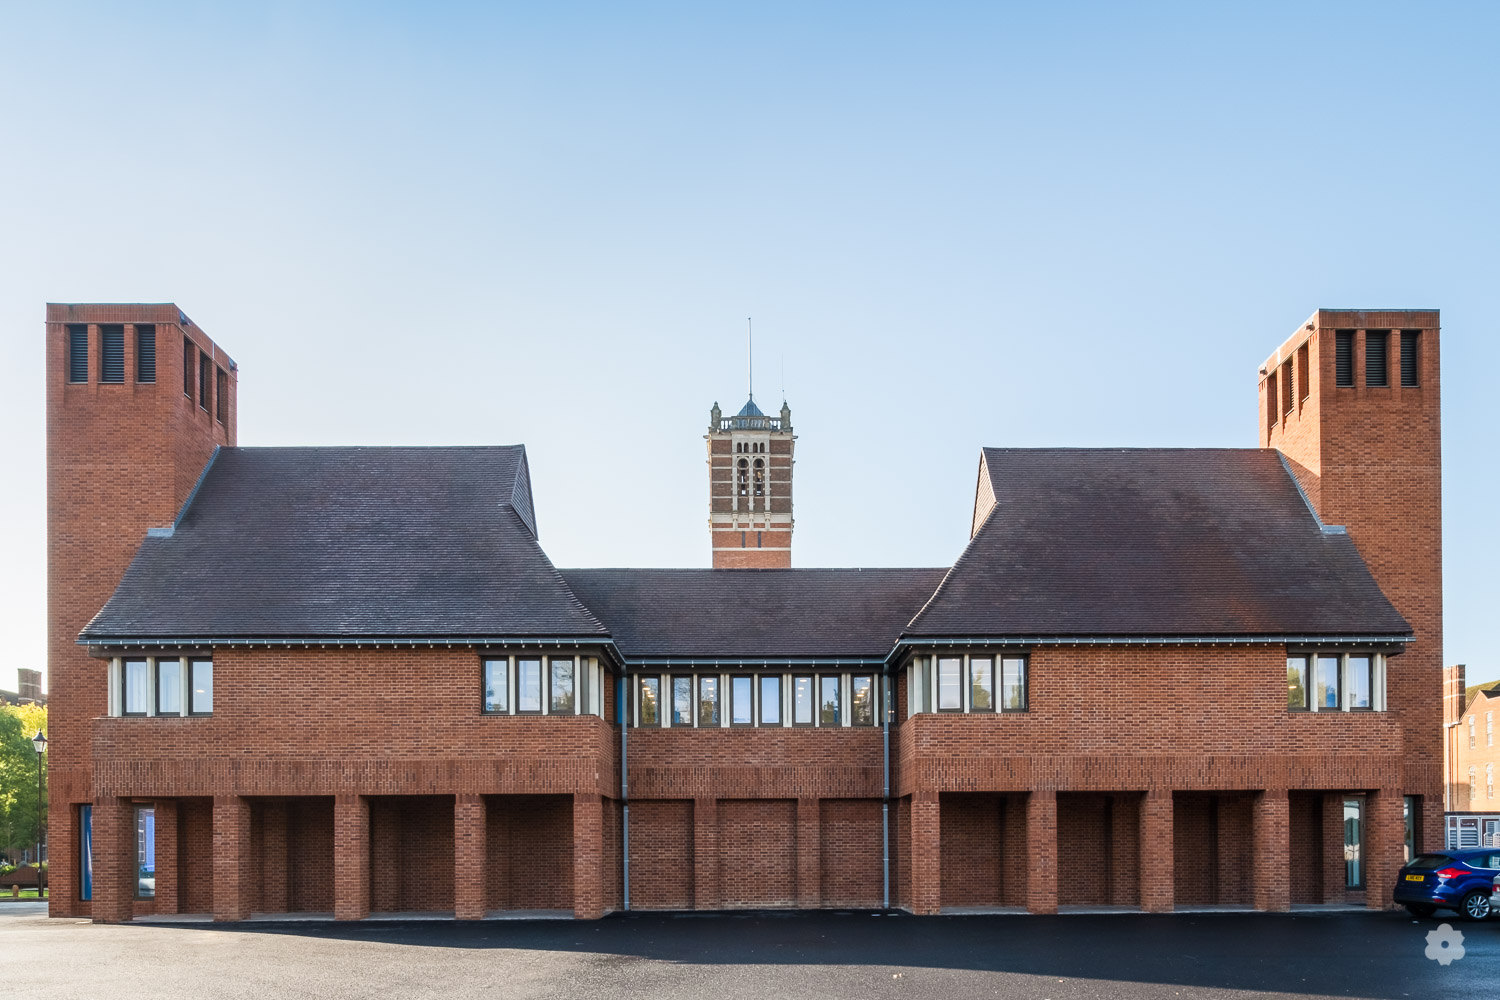 COST EFFICIENCIES AND AESTHETIC APPEAL GO HAND-IN-HAND FOR GRADE II LISTED ROOFING PROJECT @MarleyLtd